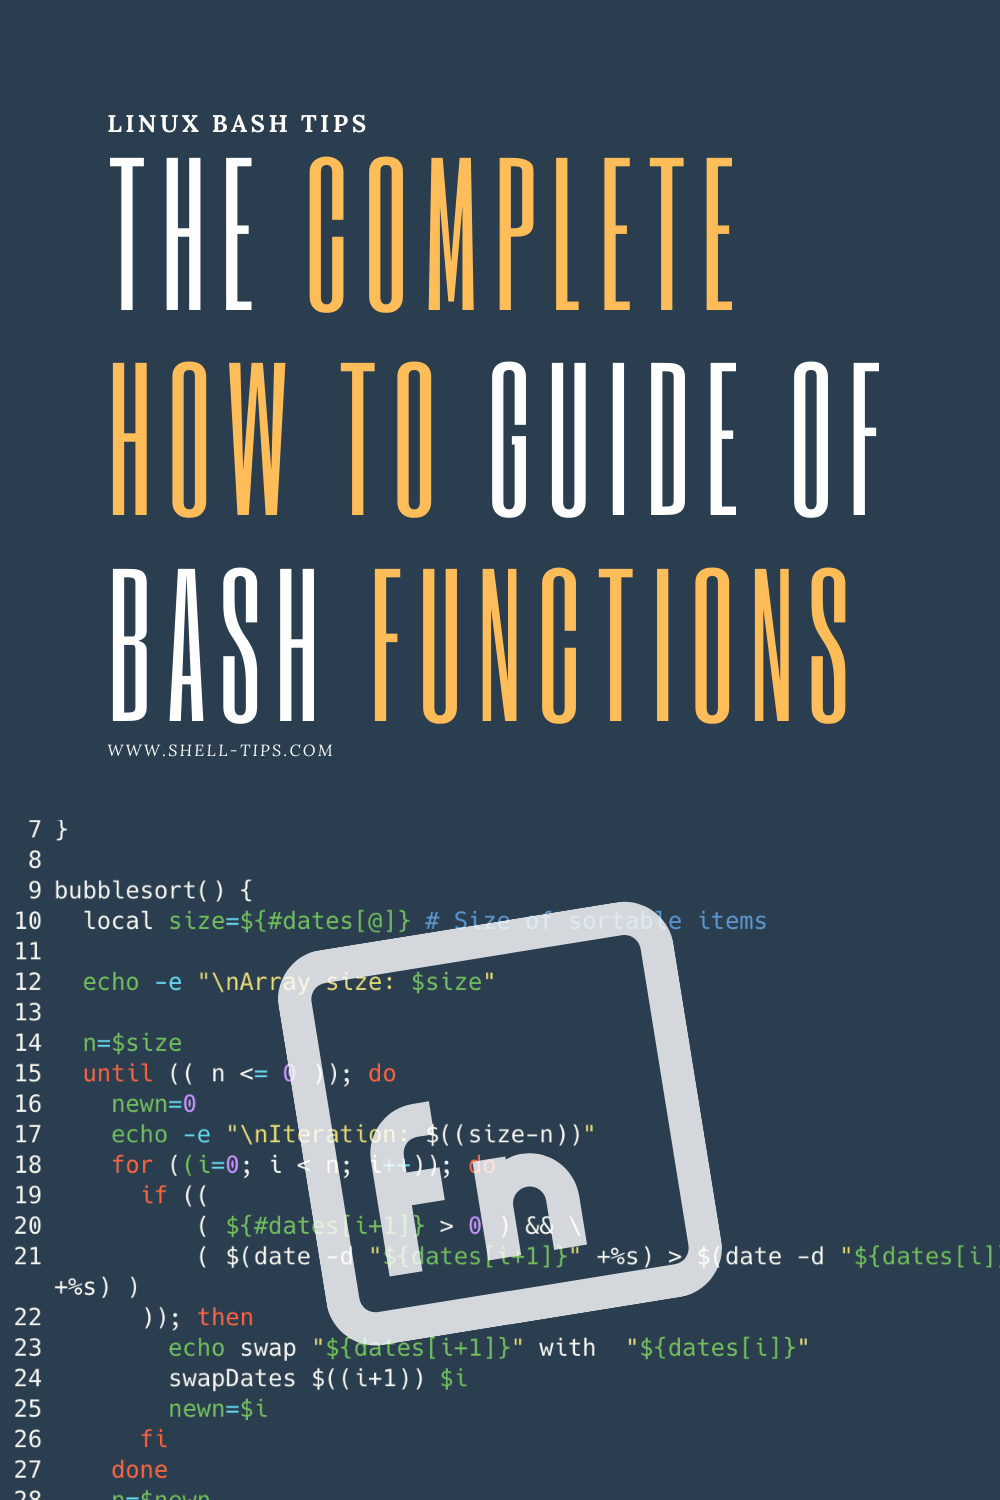 The Complete How To Guide of Bash Functions